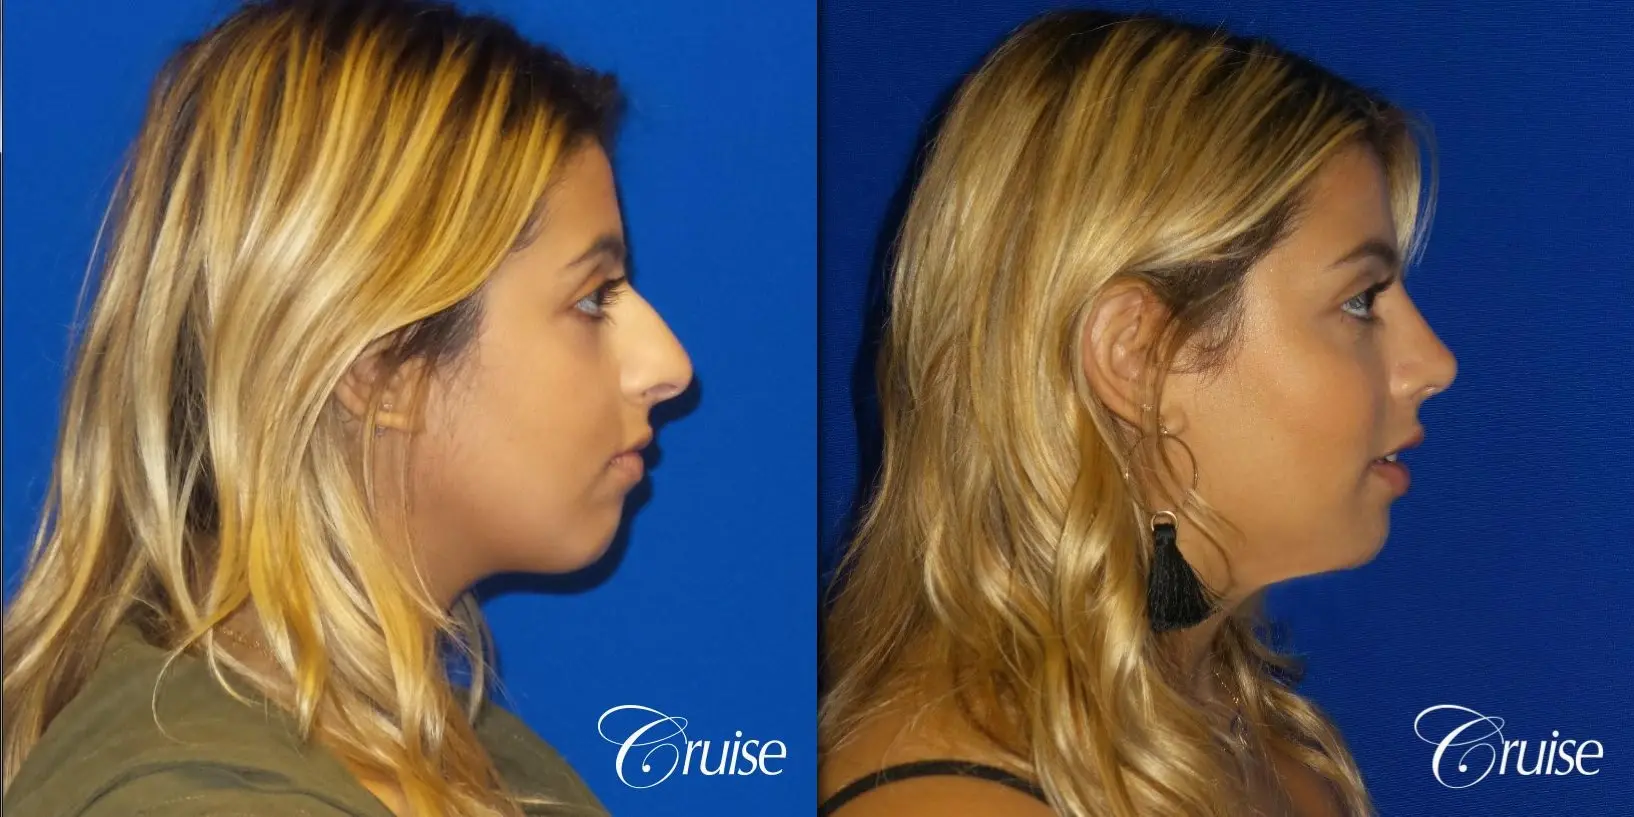 Rhinoplasty: Dorsal Hump & Droopy Tip Correction - Before and After 3